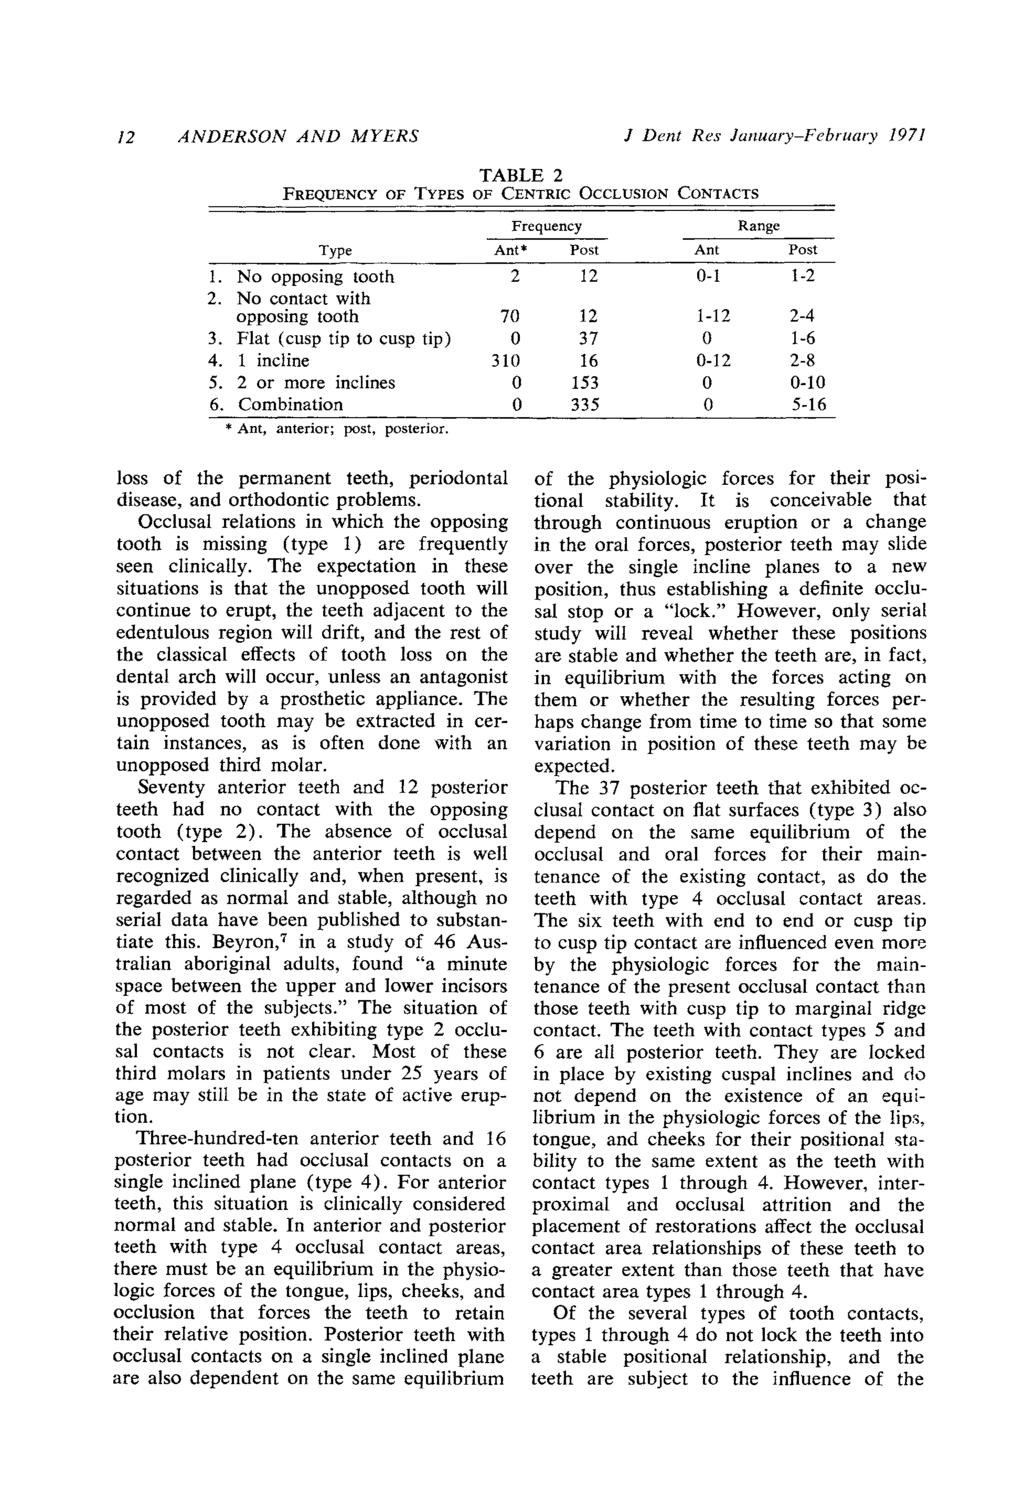 12 ANDERSON AND MYERS TABLE 2 FREQUENCY OF TYPES OF CENTRIC OCCLUSION CONTACTS J Dent Res January-February 1971 Frequency Range Type Ant* Post Ant Post 1. No opposing tooth 2 12-1 1-2 2.